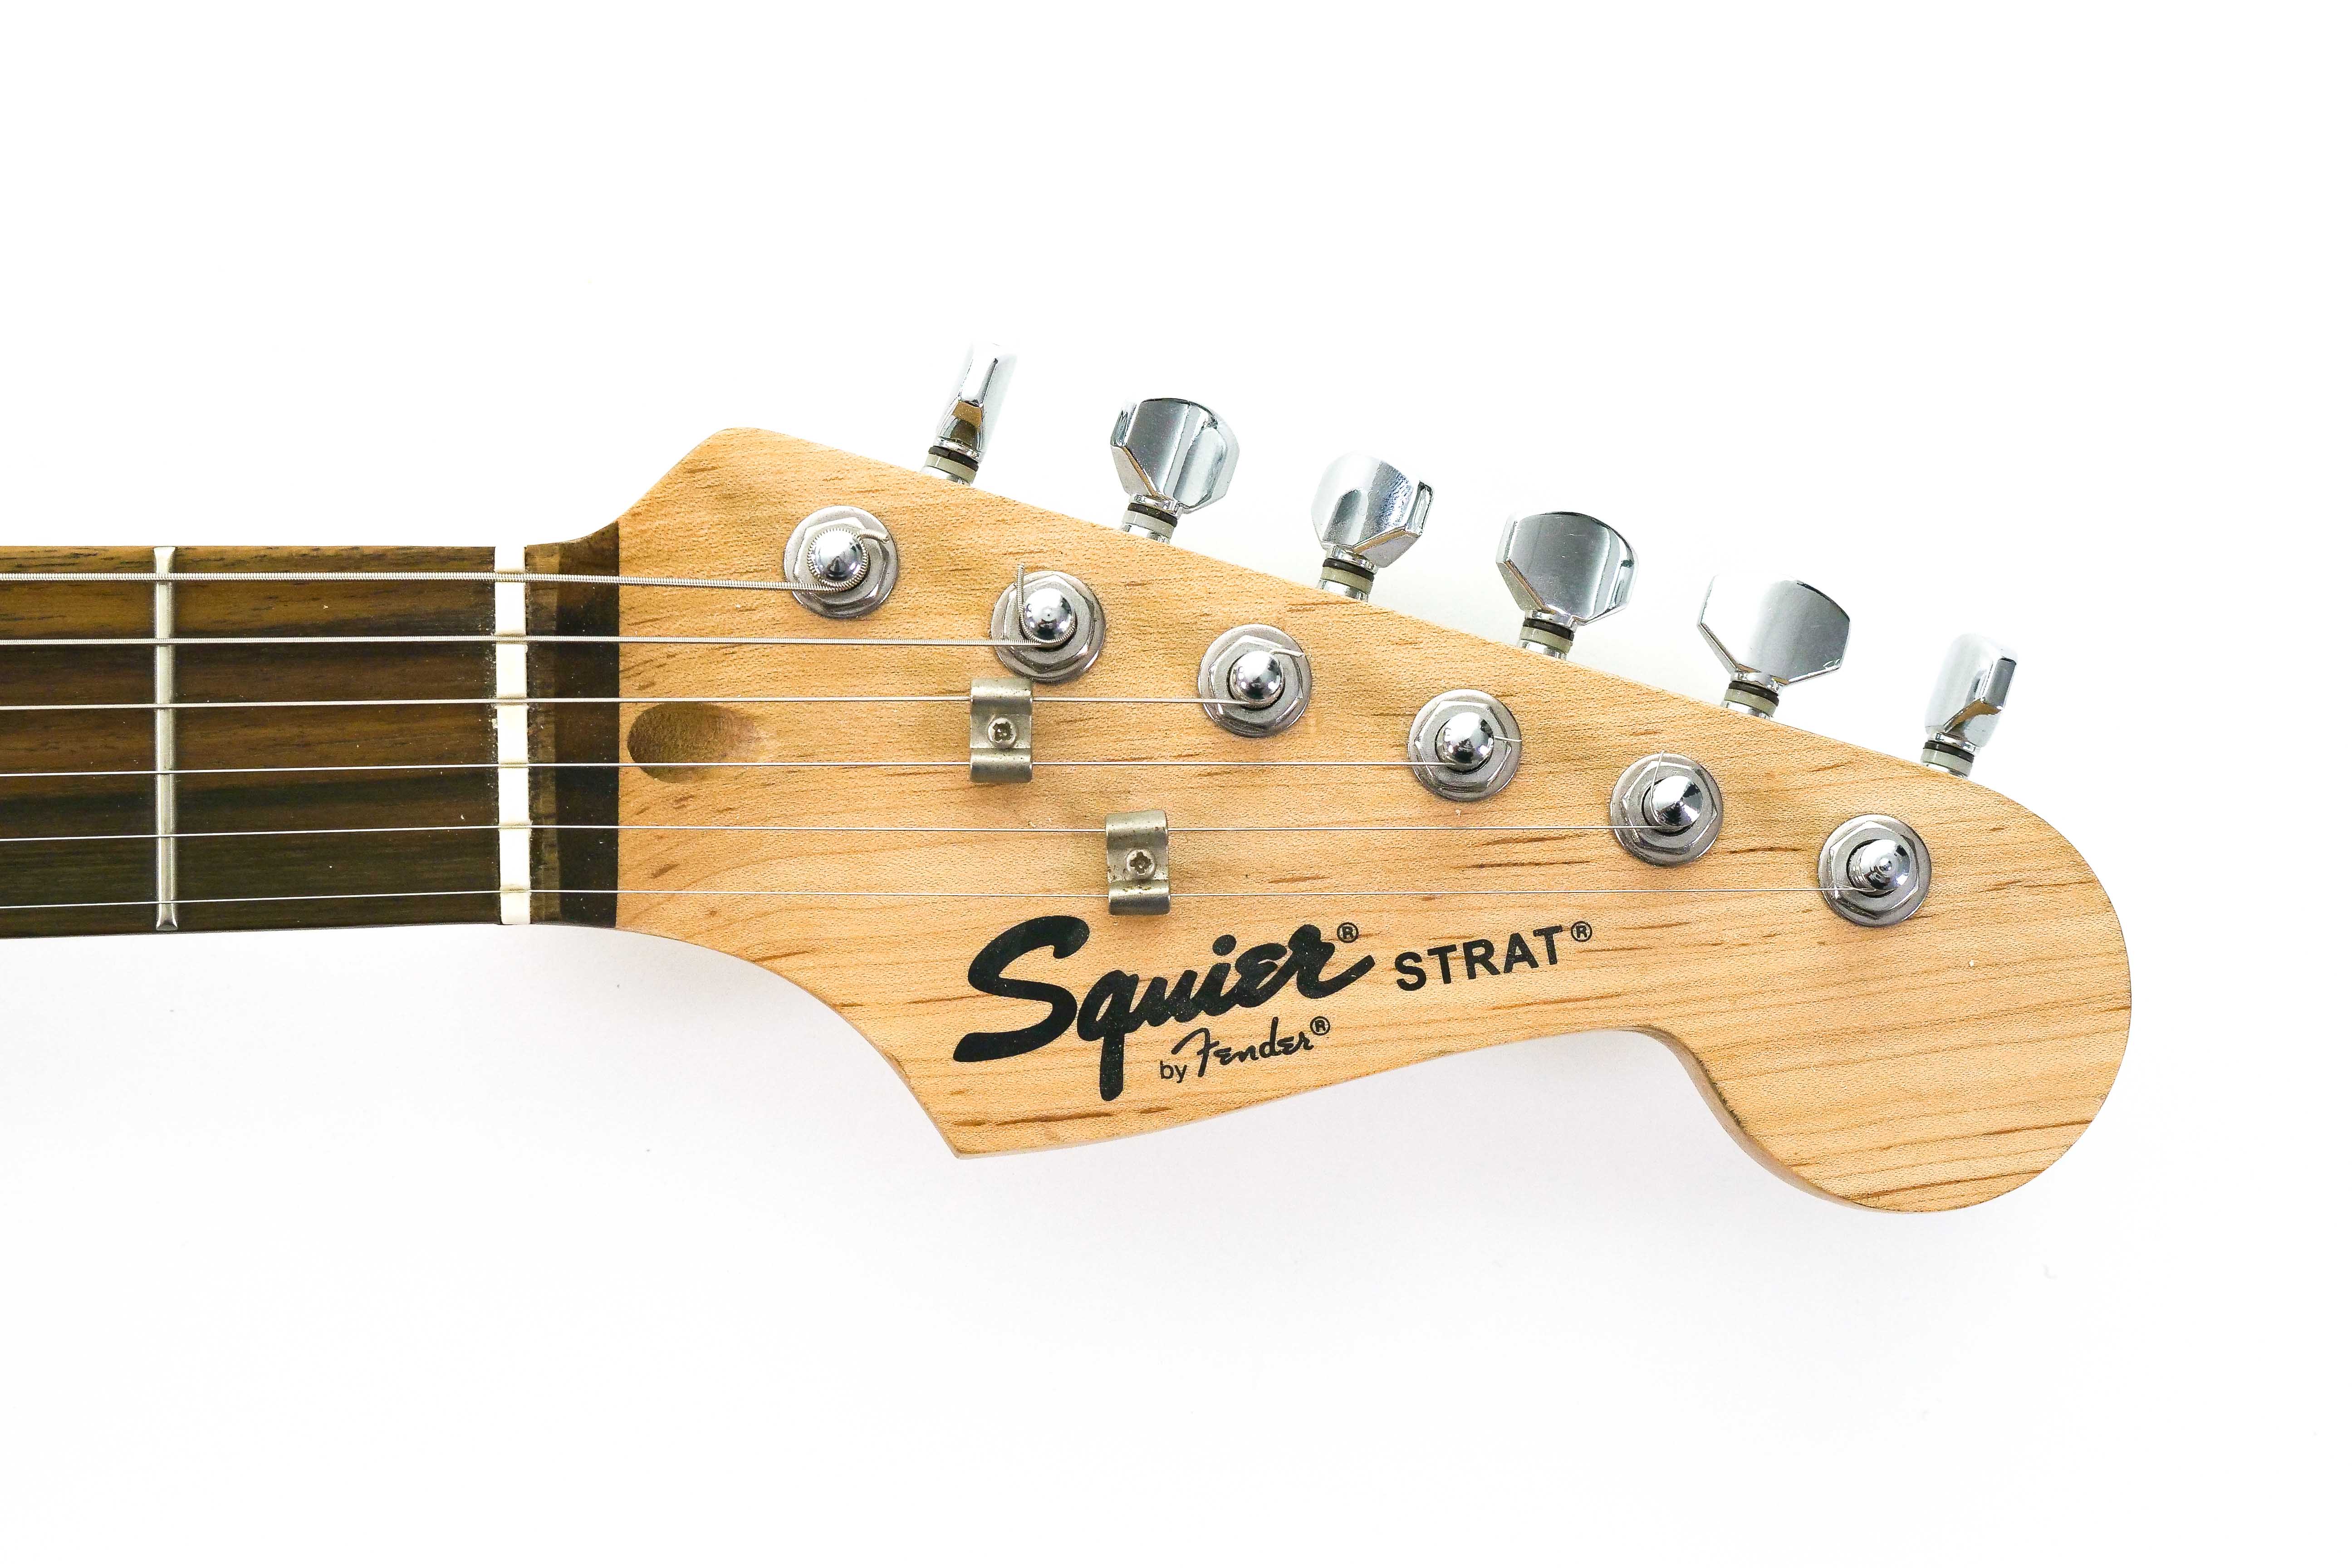 Fender Squier Stratocaster - Terry Carter Music Store